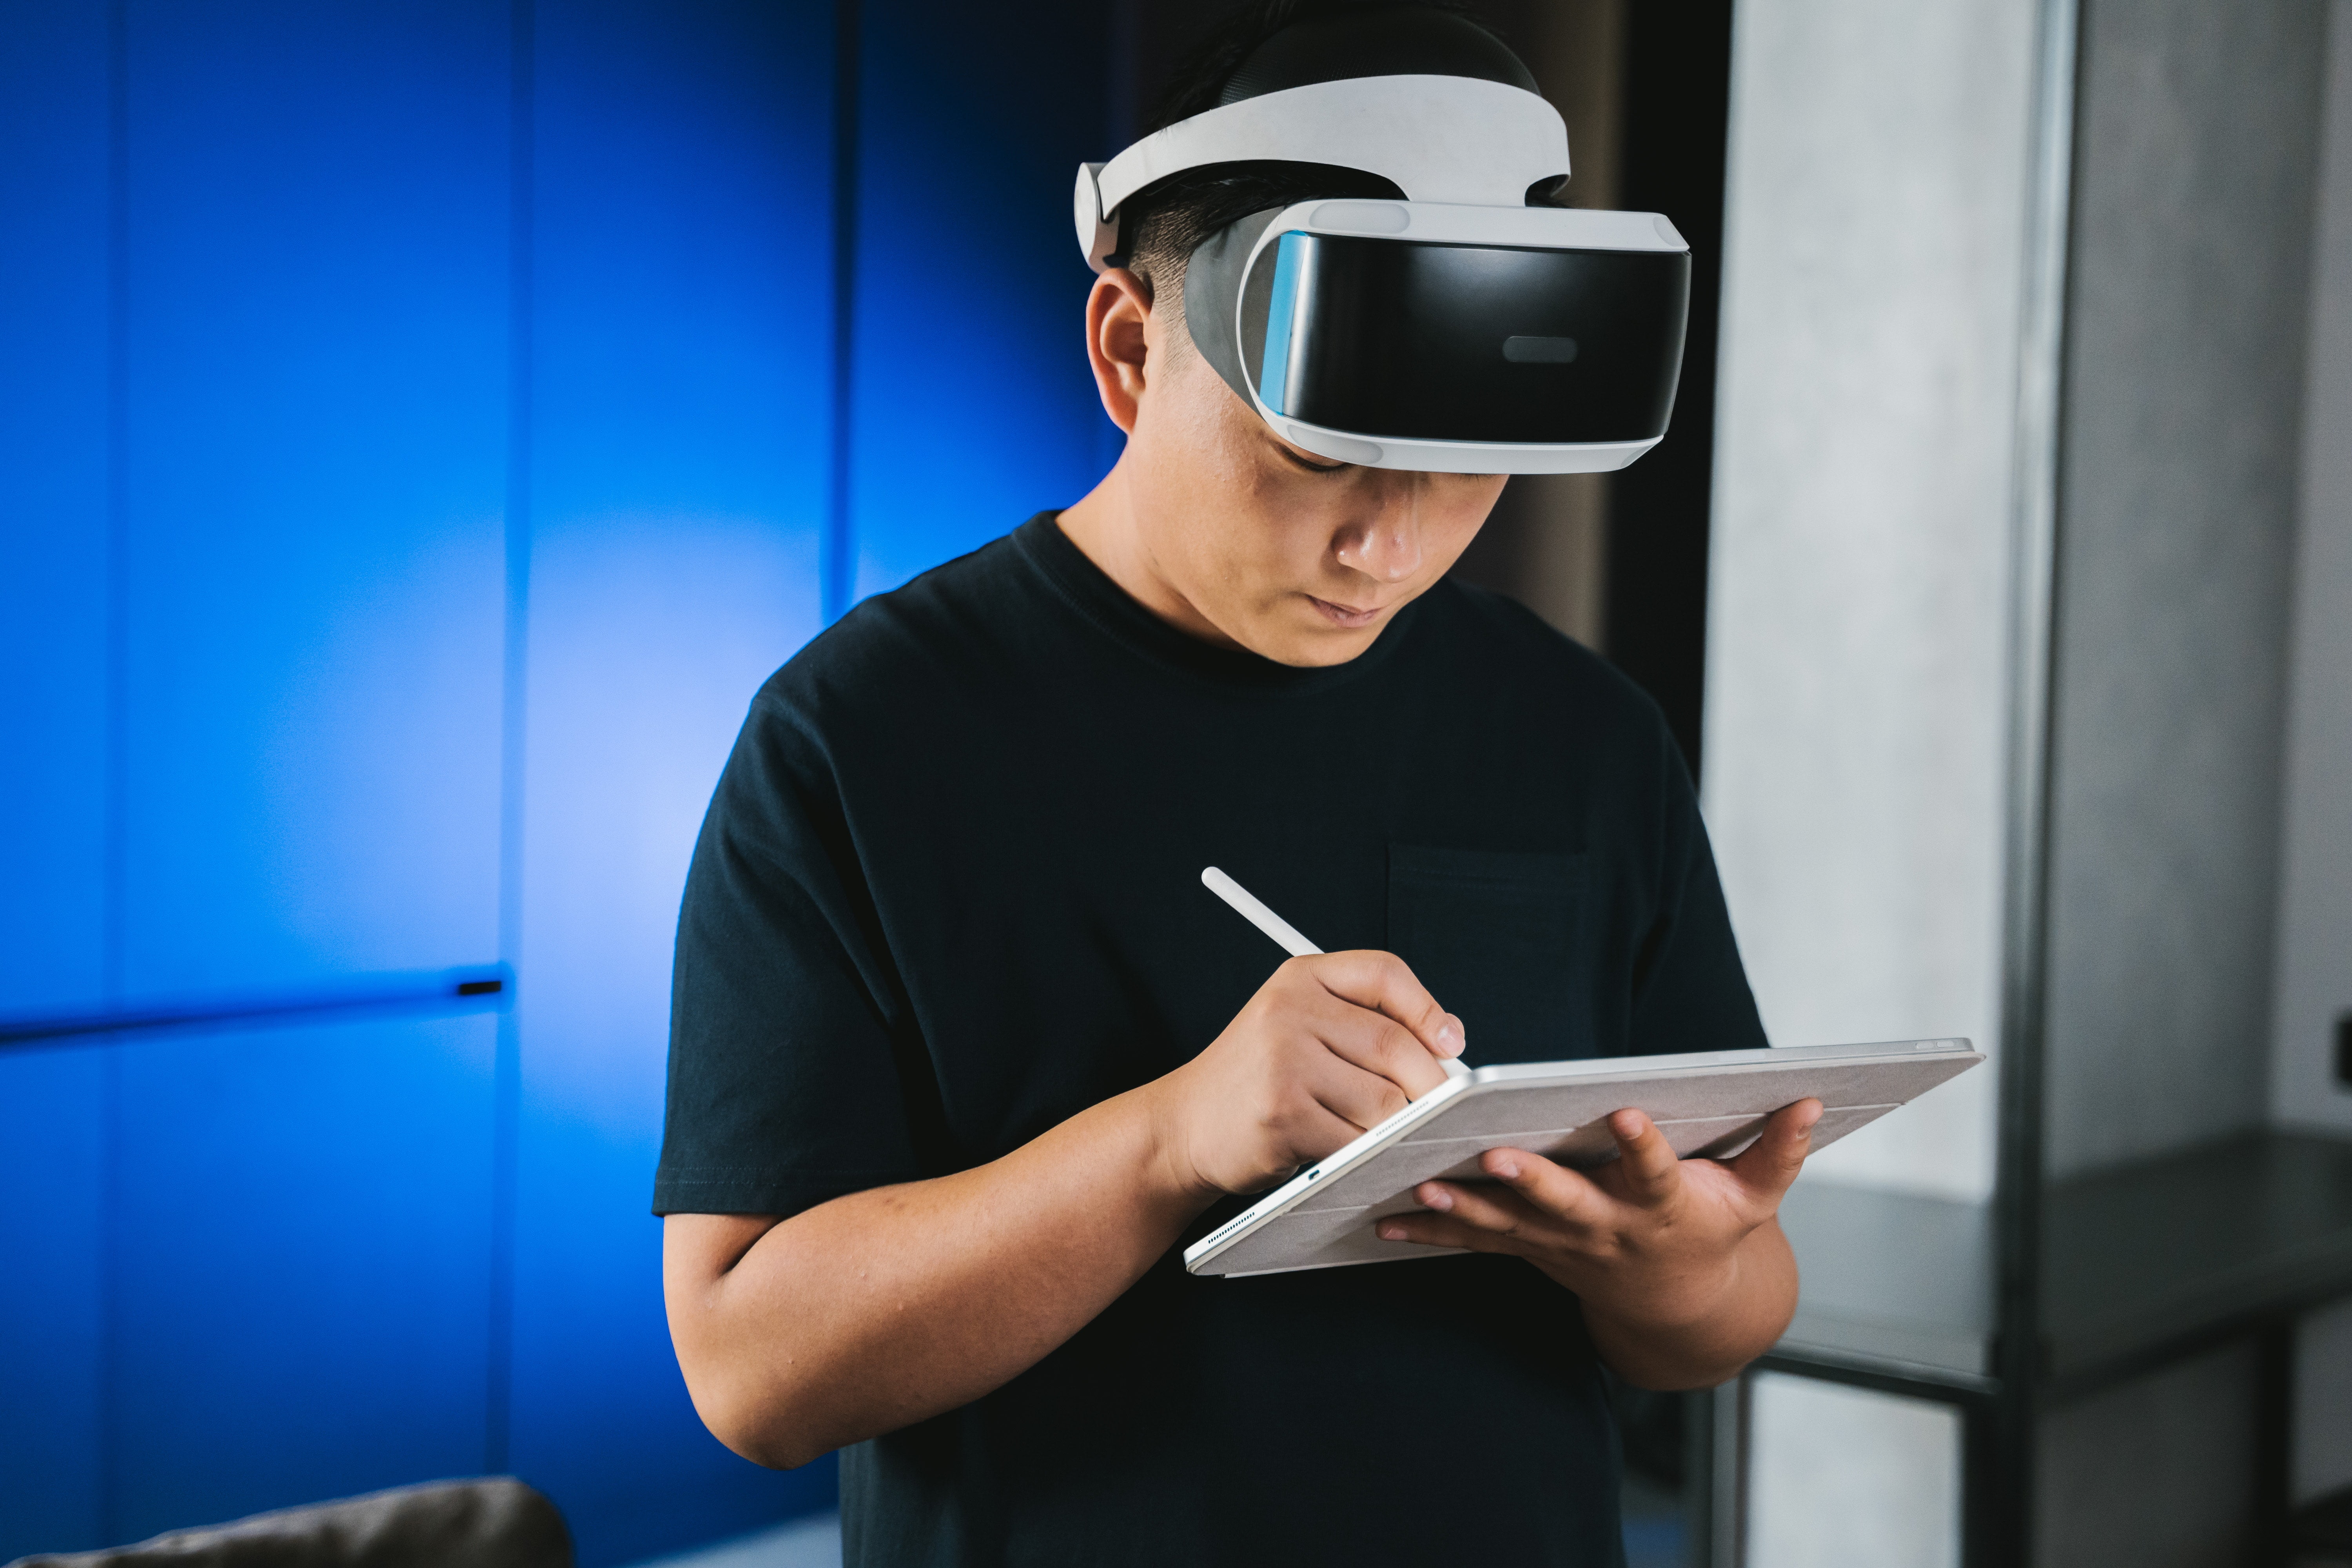 Sony sees itself well positioned for the Metaverse